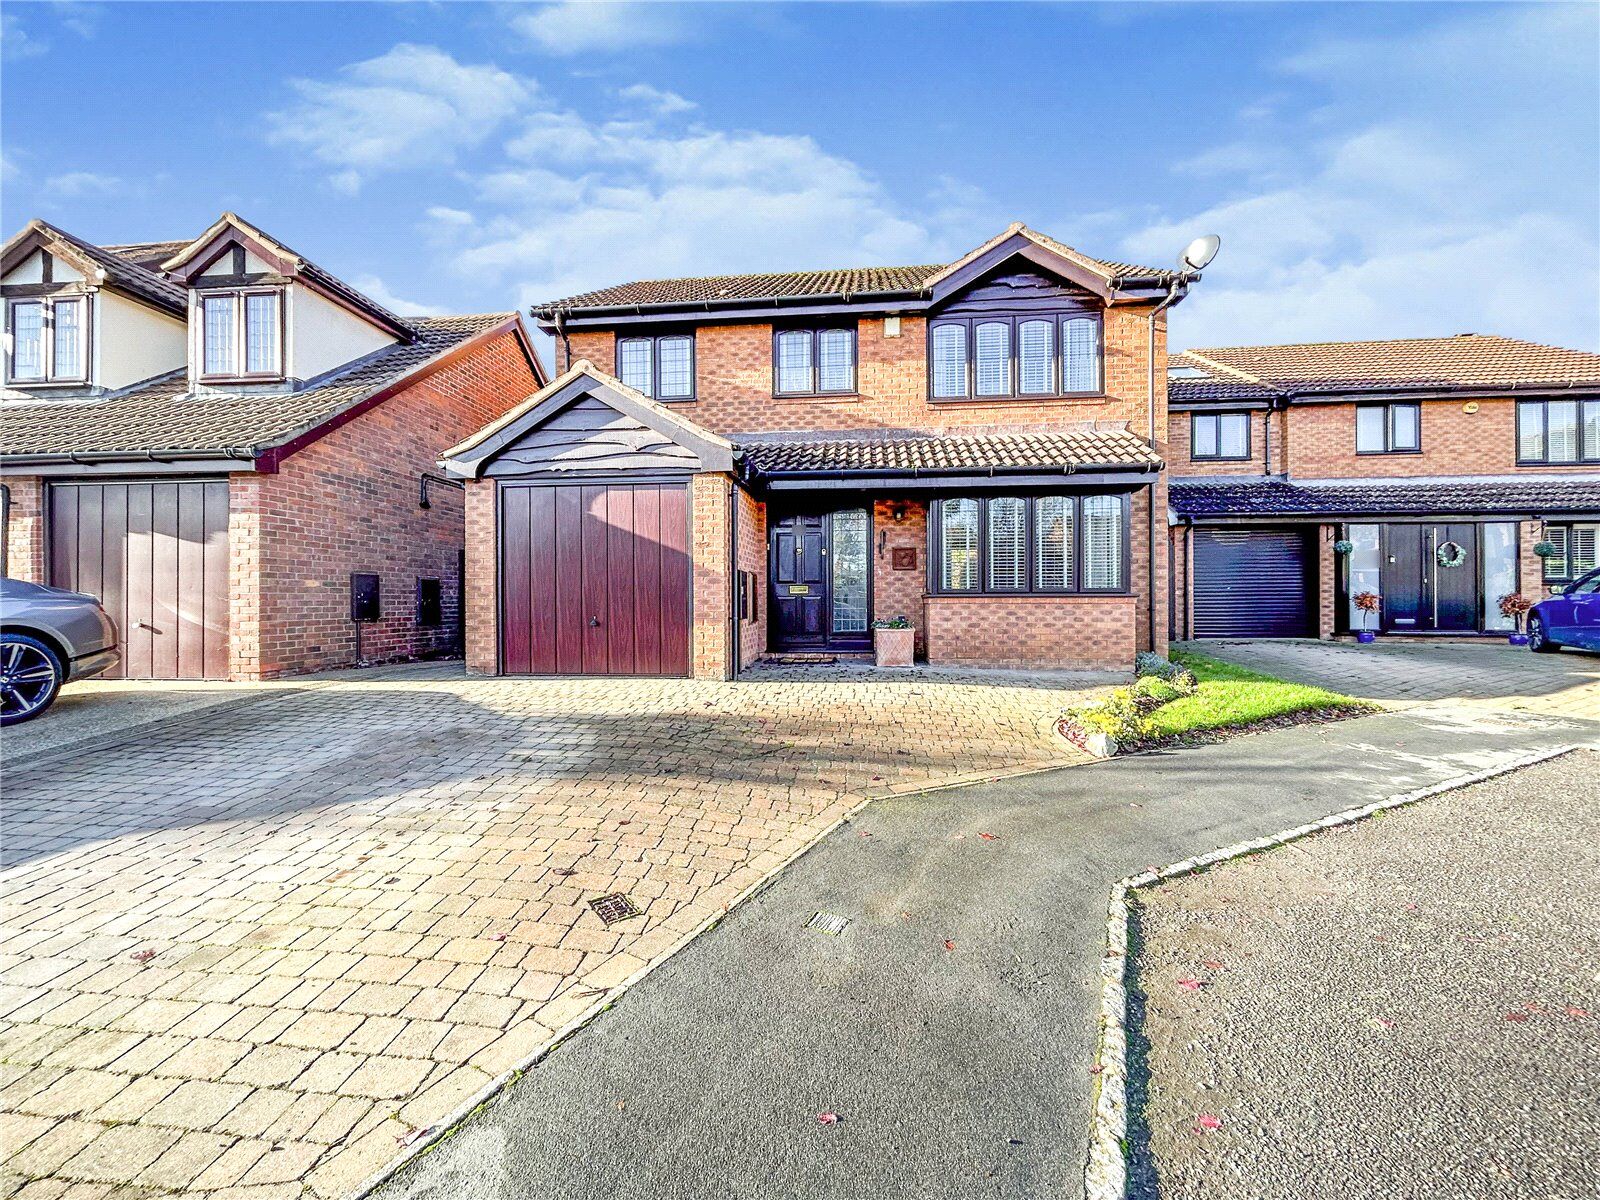 4 bedroom detached house for sale Ansley Way, St. Ives, PE27, main image